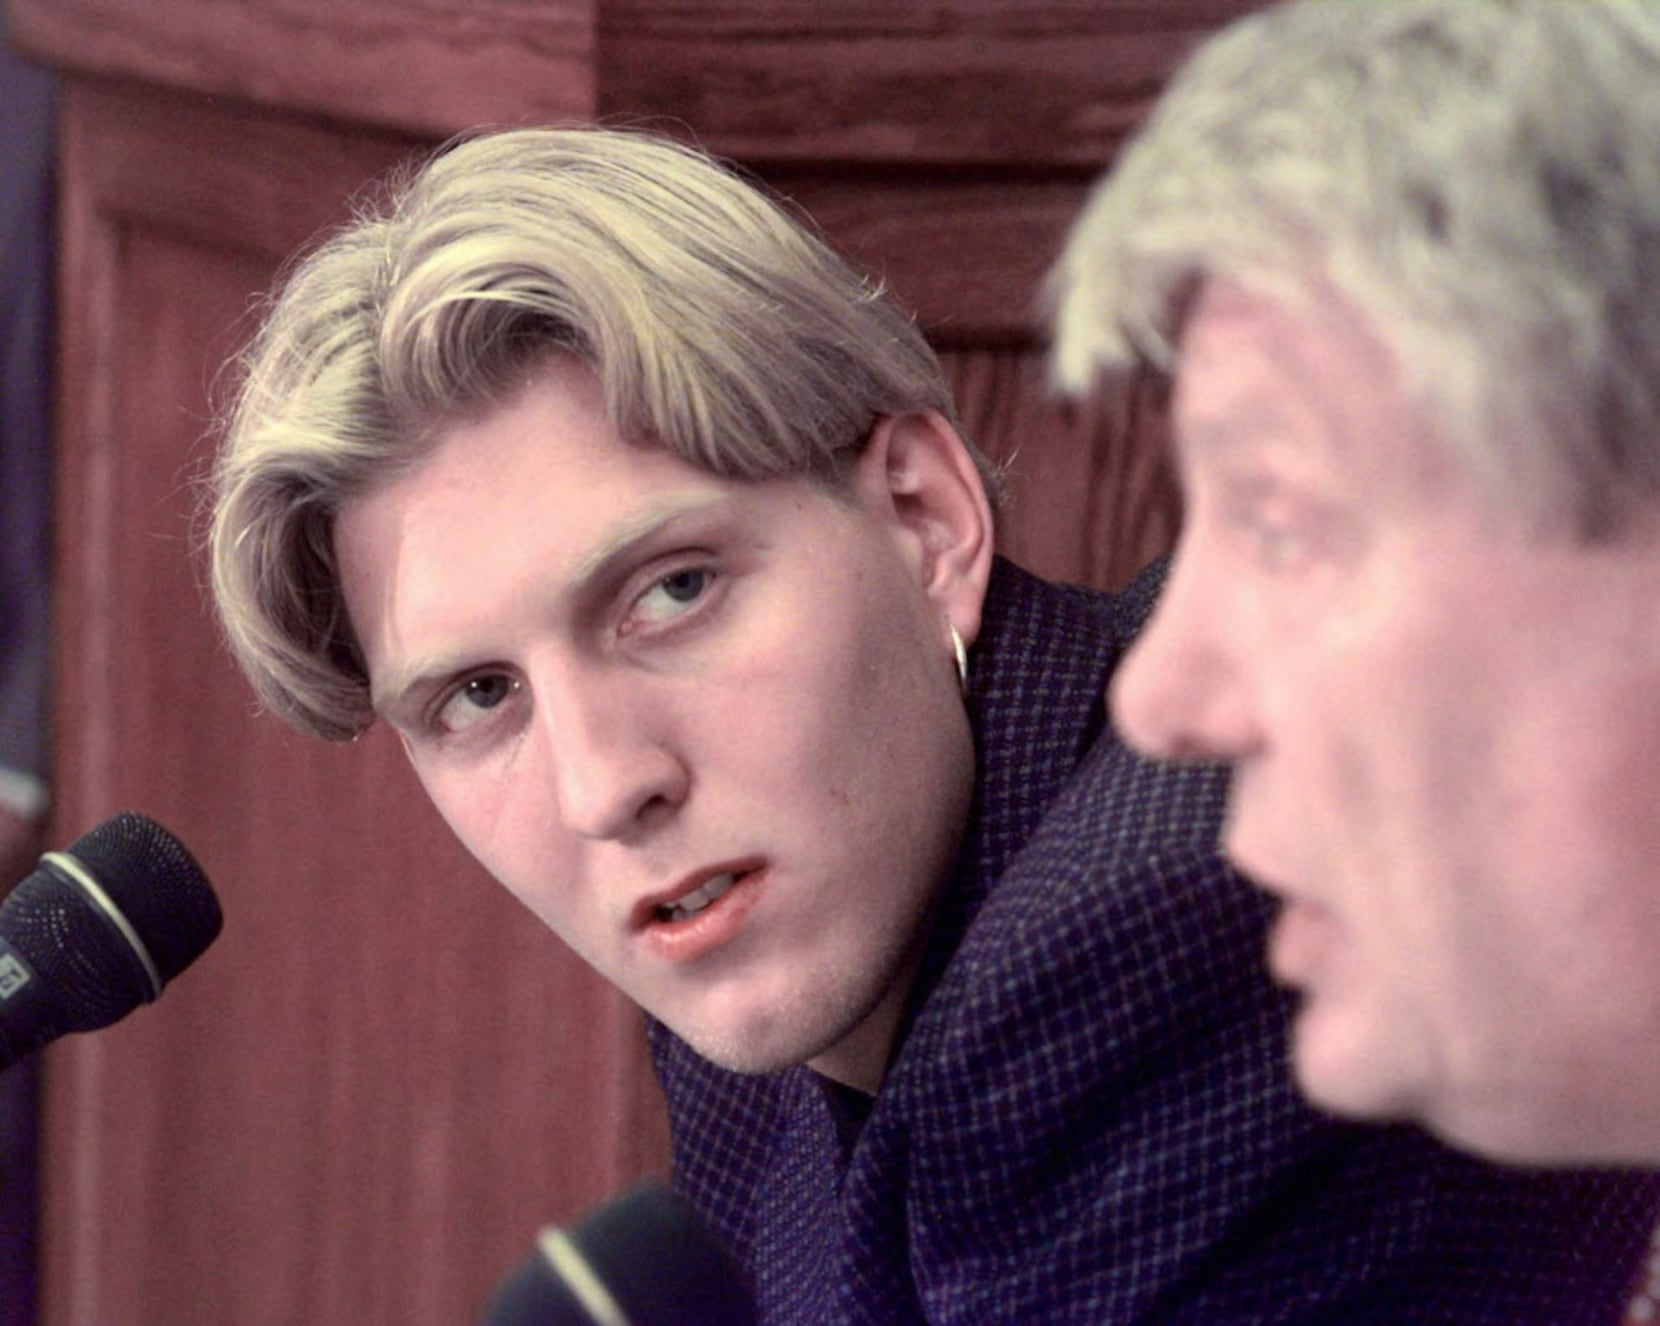 The Mavericks Went To Extreme Lengths To Make Sure They Drafted Dirk  Nowitzki In 1998: He Hid For A Week In Donnie's Basement - Fadeaway World